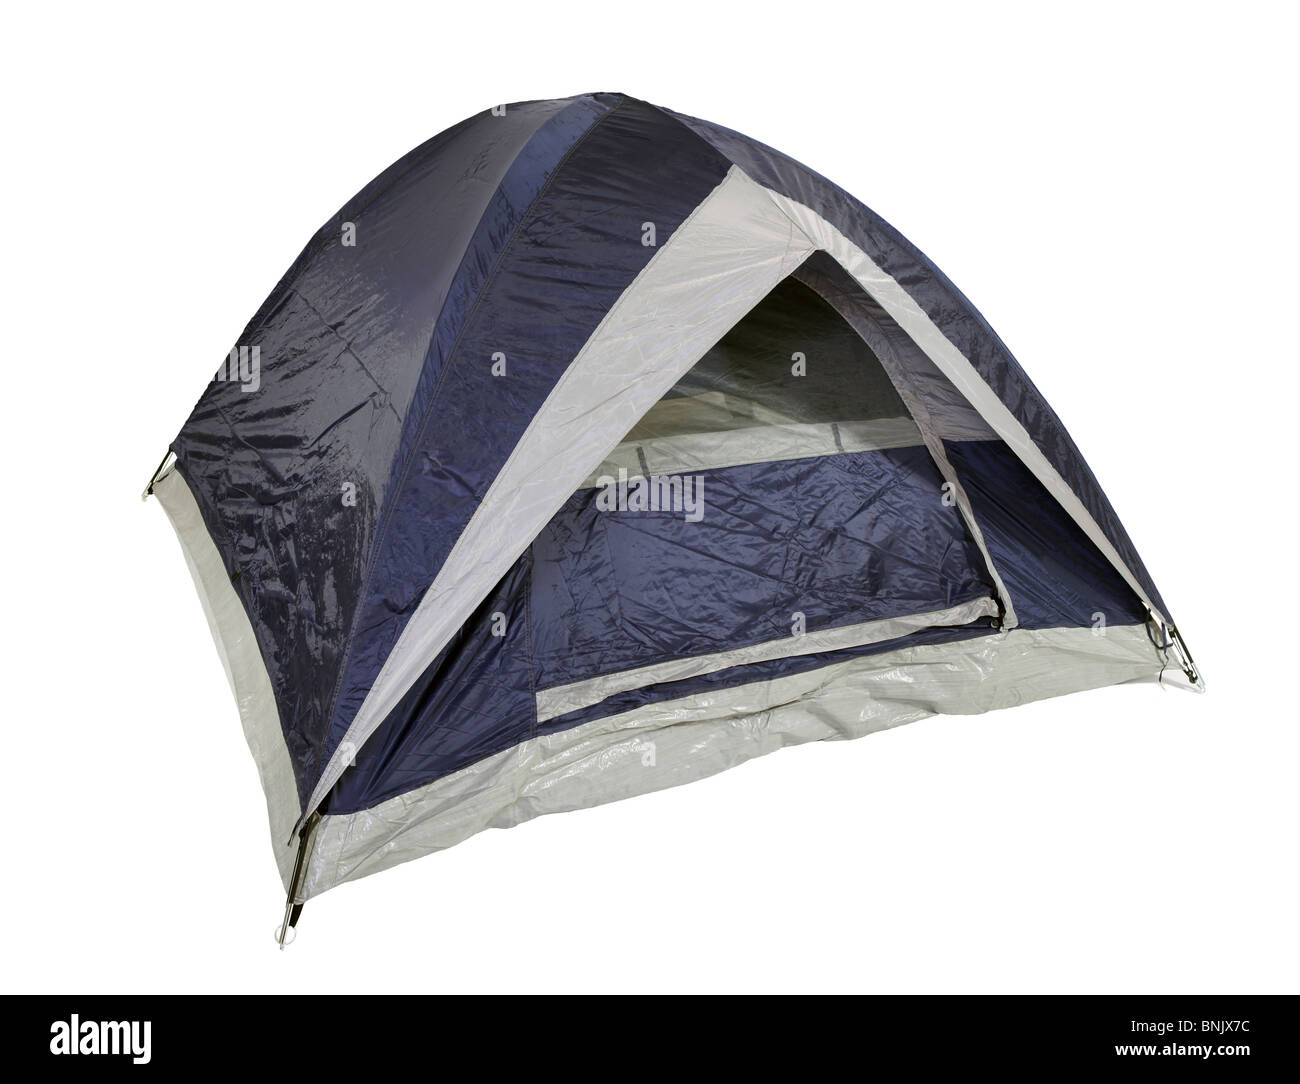 Fresh new blue tent. Ready for summer camping fun. Stock Photo